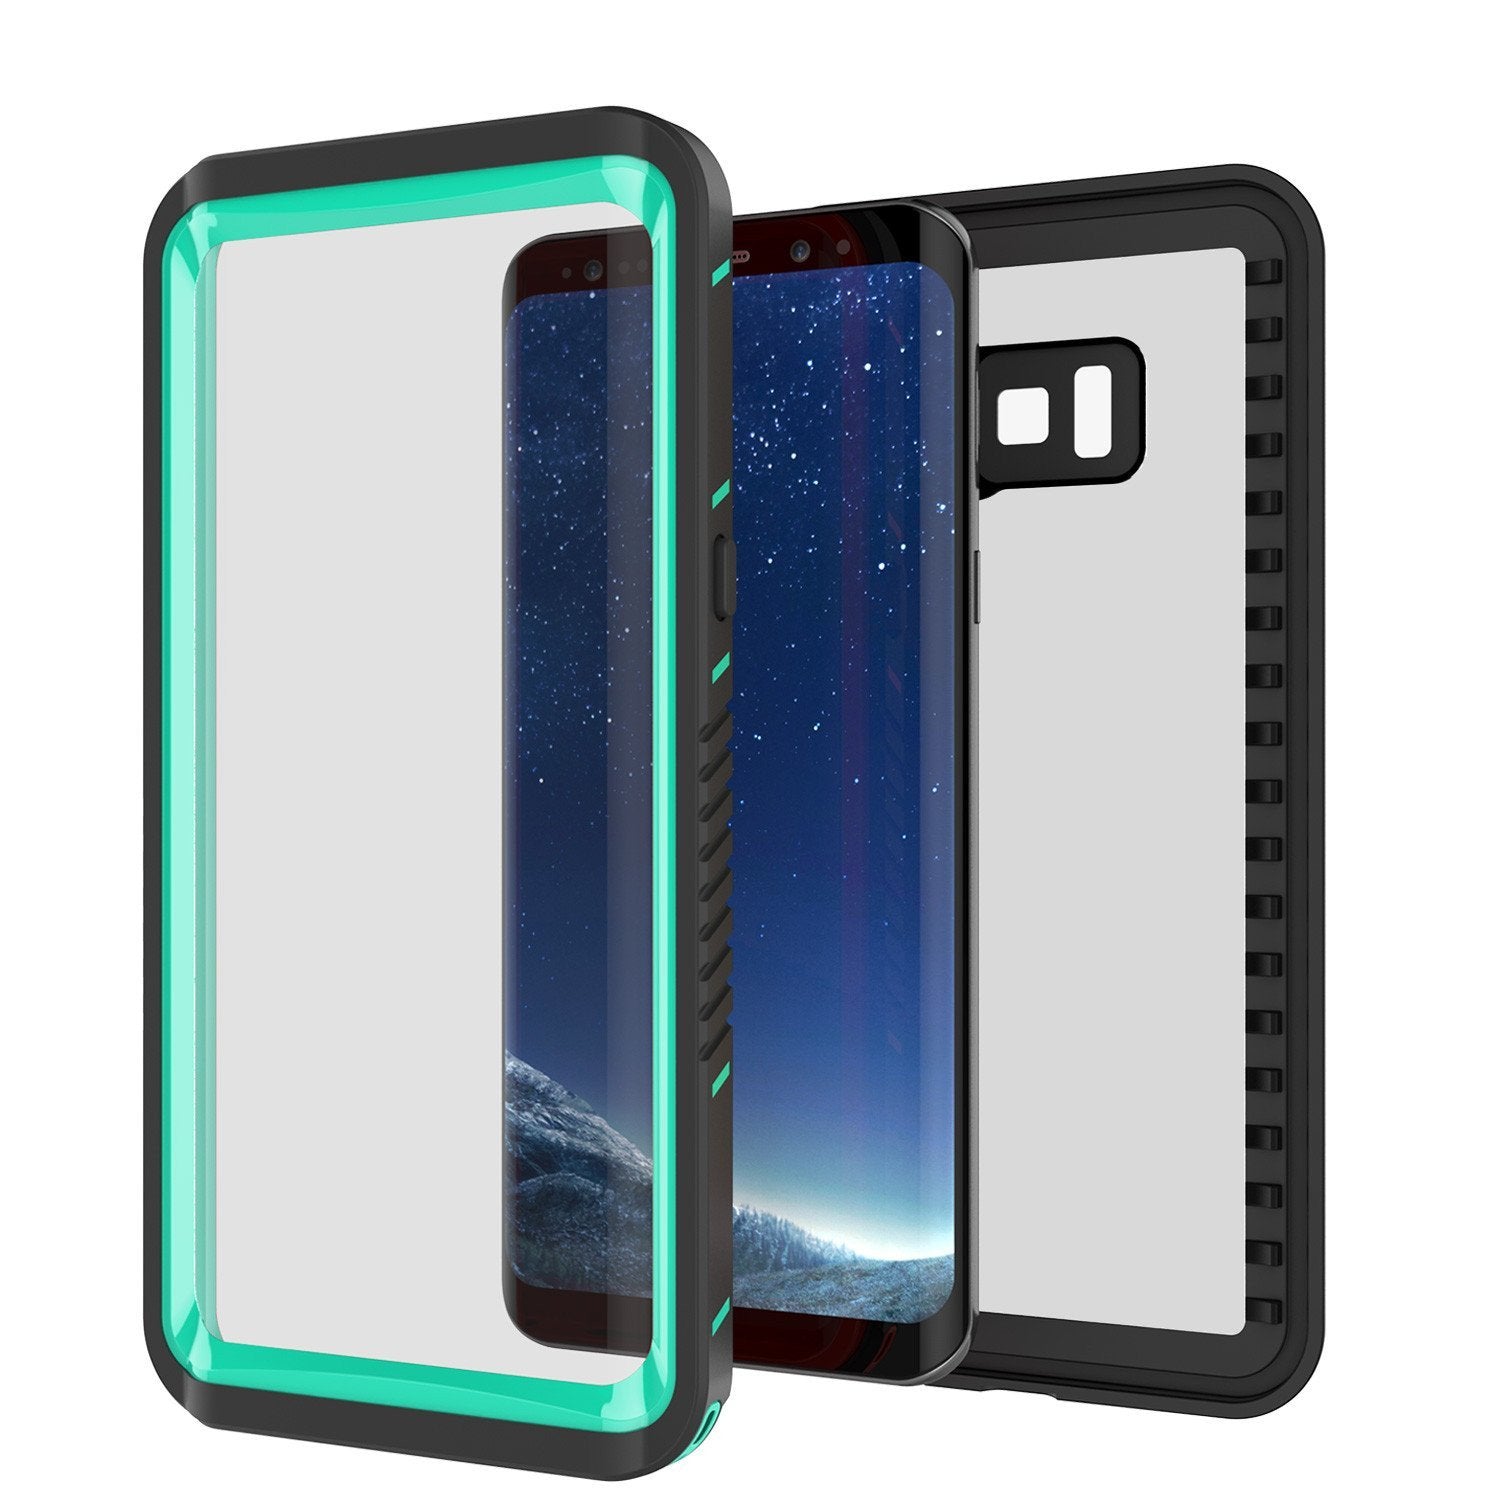 Galaxy S8 Waterproof Case, Punkcase [Extreme Series] [Slim Fit] [IP68 Certified] [Shockproof] [Snowproof] [Dirproof] Armor Cover W/ Built In Screen Protector for Samsung Galaxy S8 [Teal] - PunkCase NZ